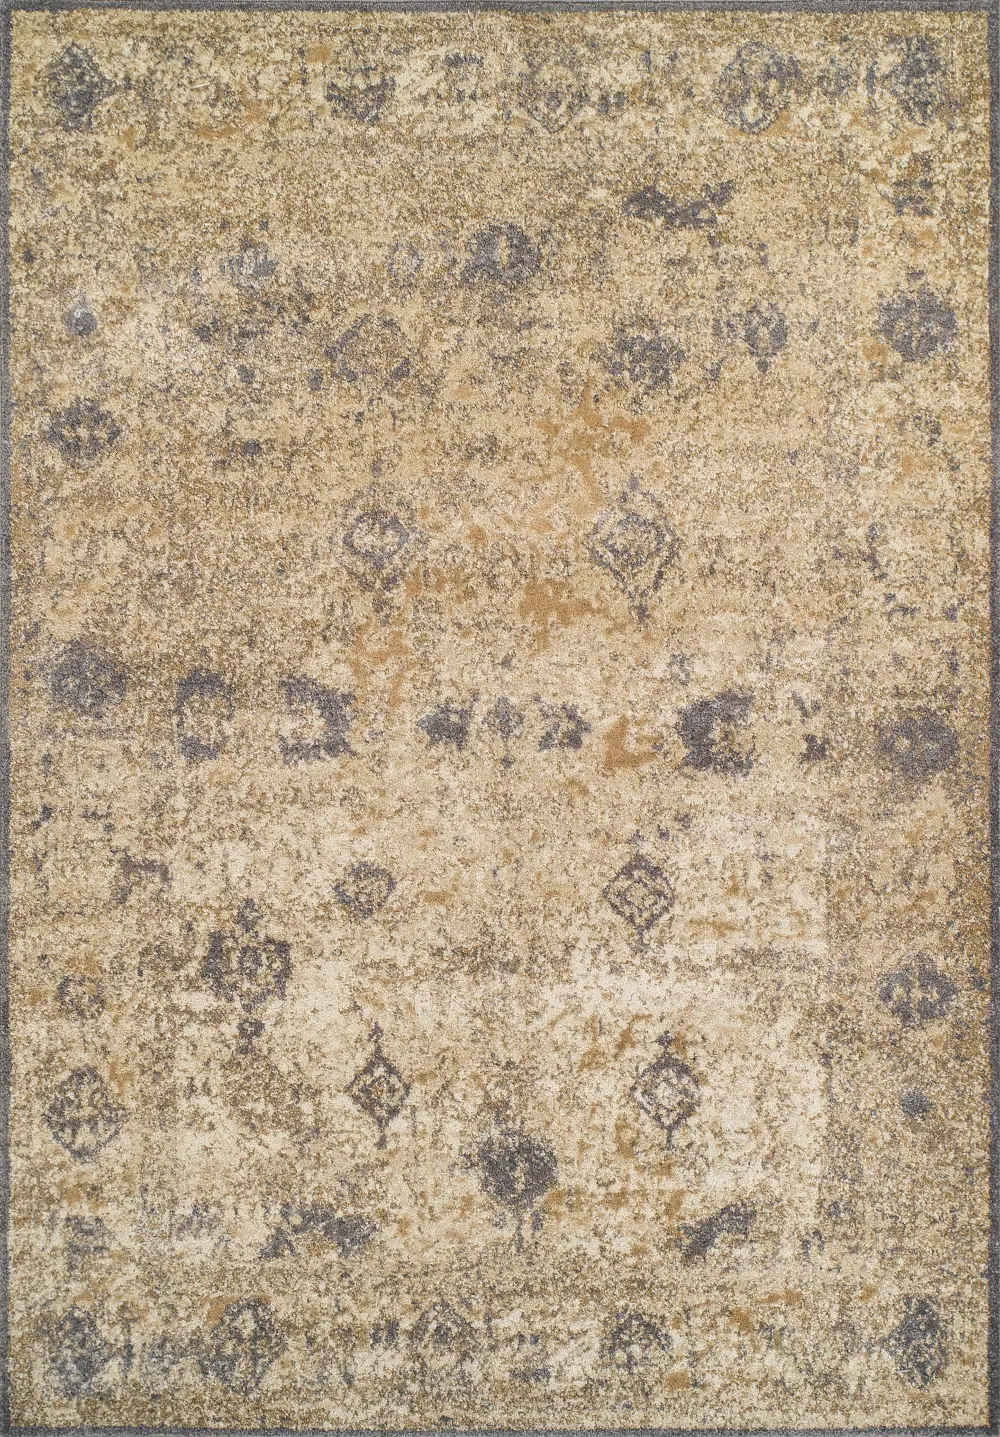 AQ1GR10X13 10 x 13 X-Large Ivory and Gray Area Rug - Antiquity-1